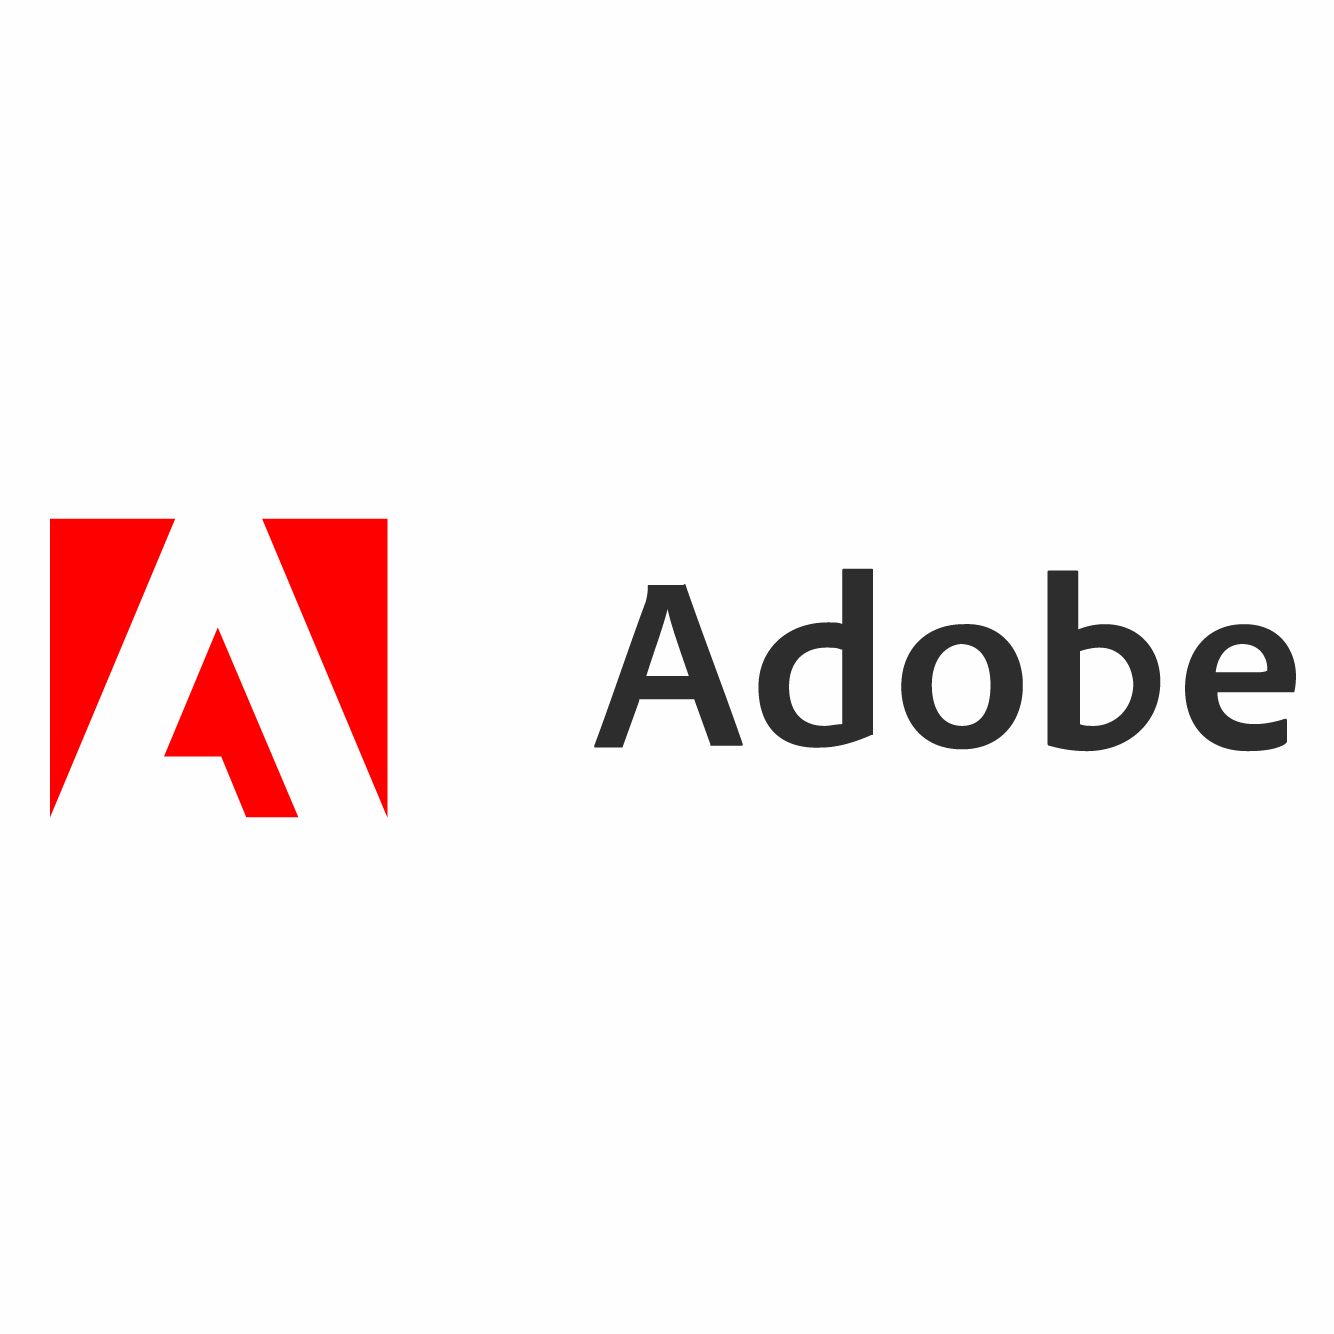 https://securetech.ae/wp-content/uploads/2019/02/17.ADOBE_.png